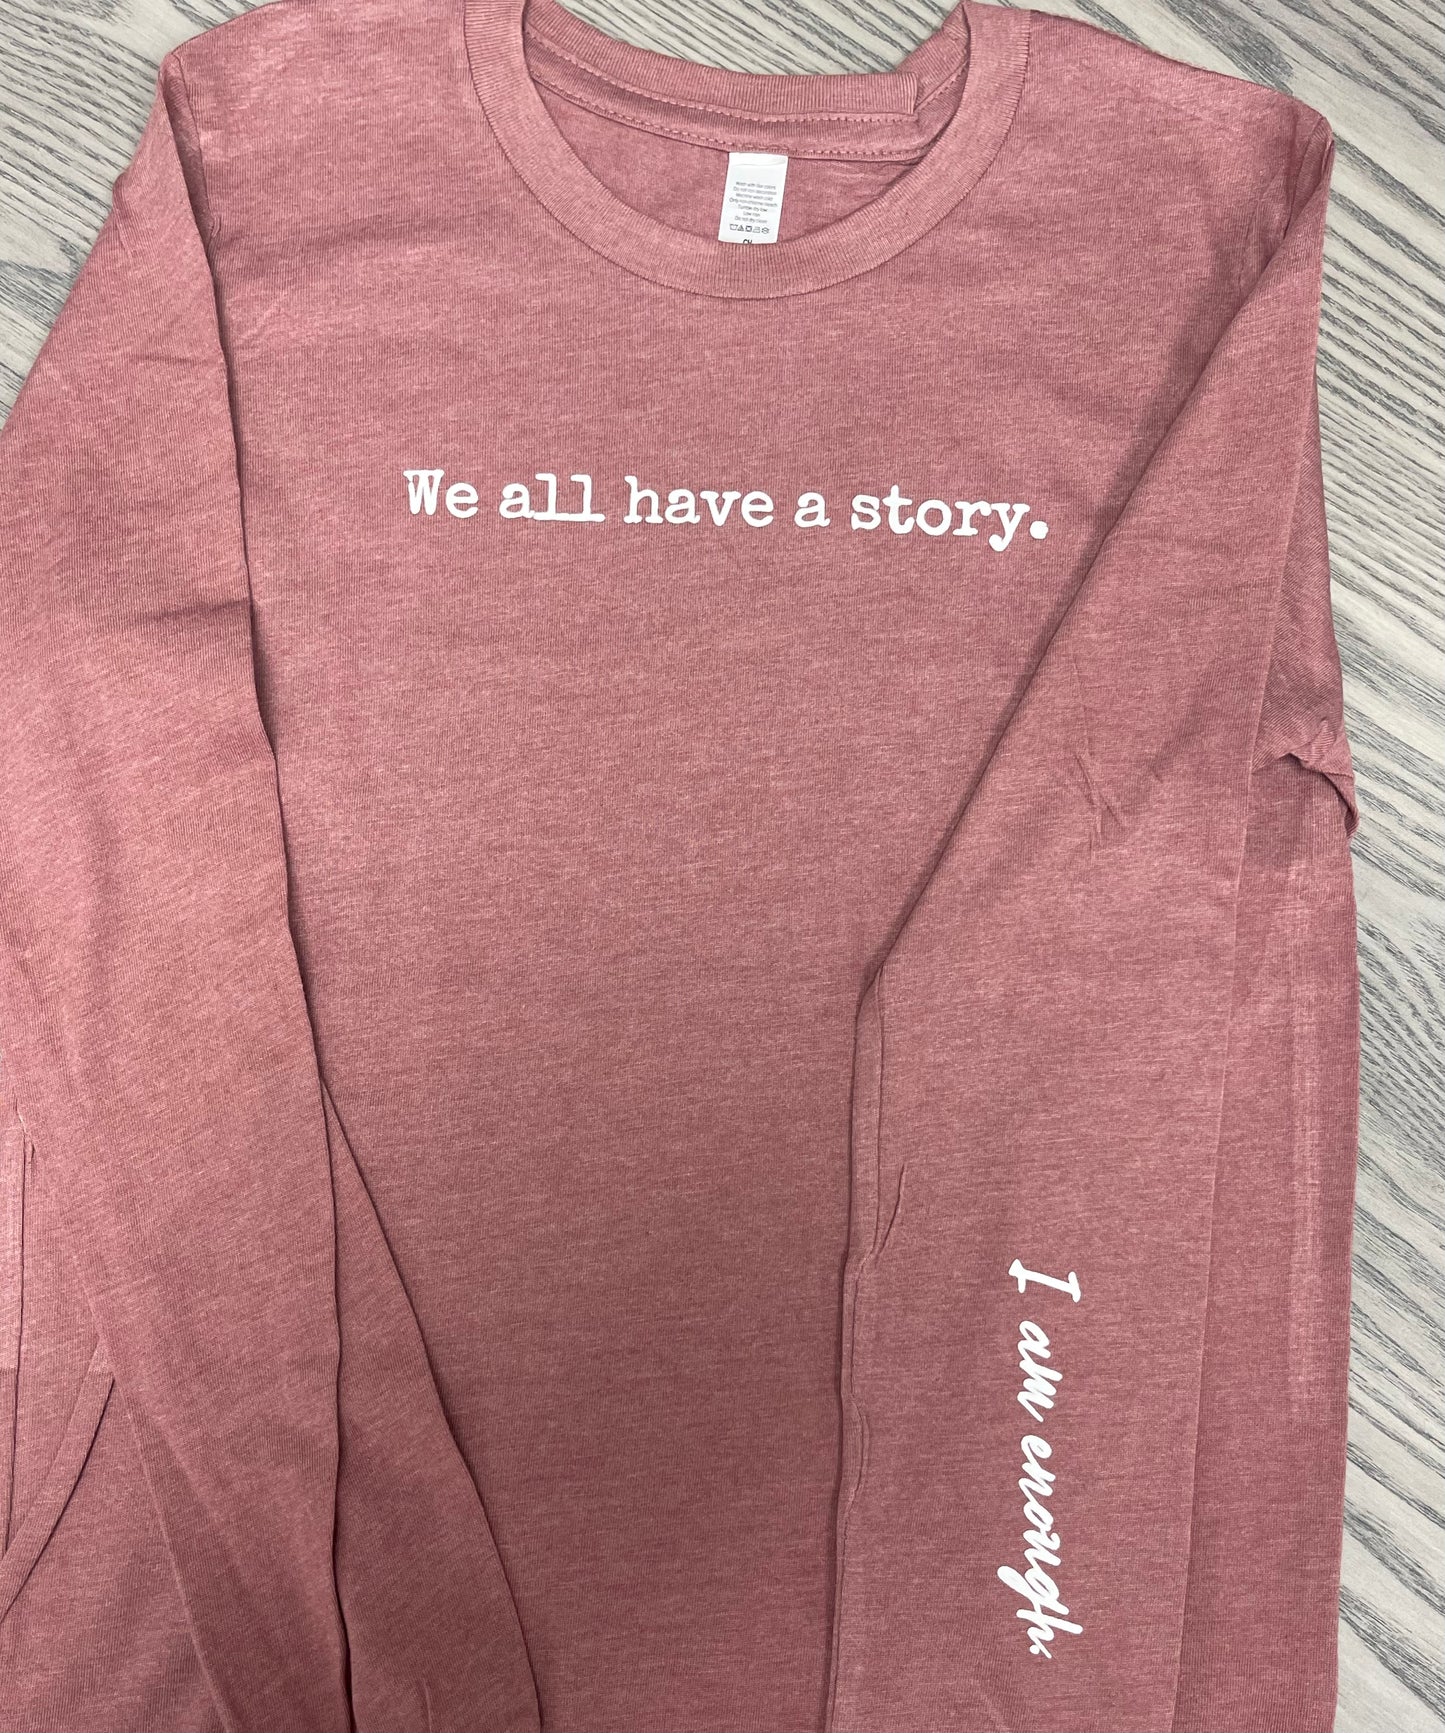 Youth Size-We all have a story